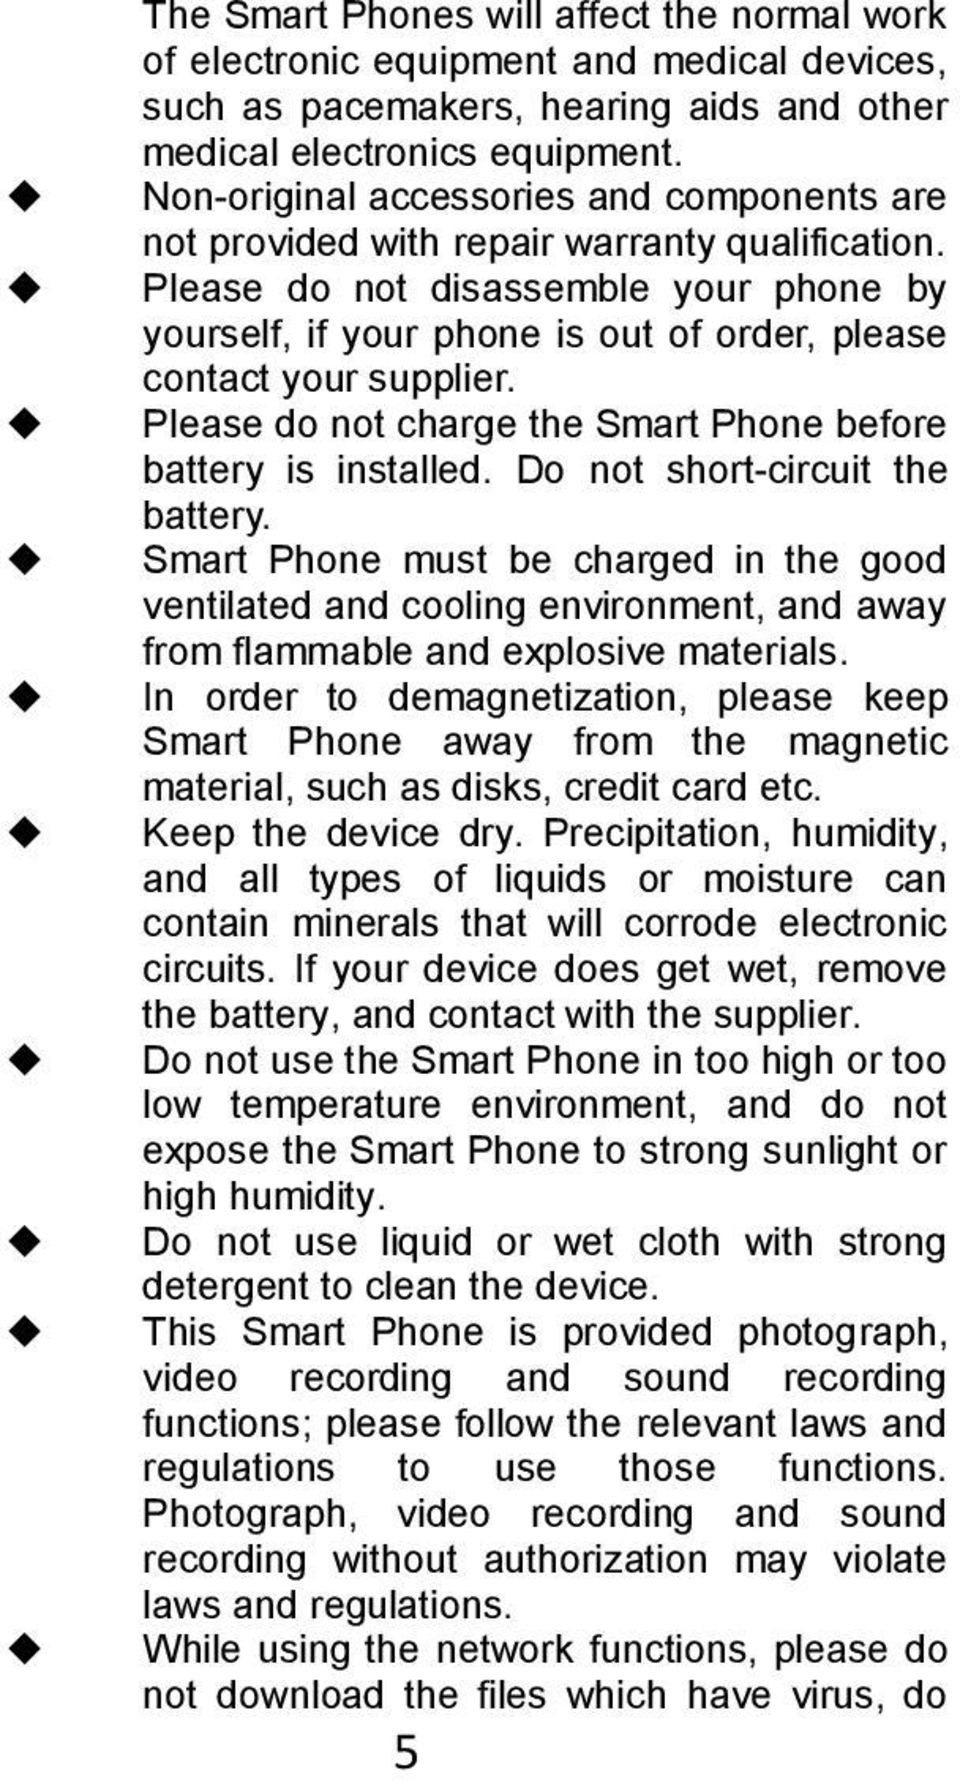 Please do not disassemble your phone by yourself, if your phone is out of order, please contact your supplier. Please do not charge the Smart Phone before battery is installed.